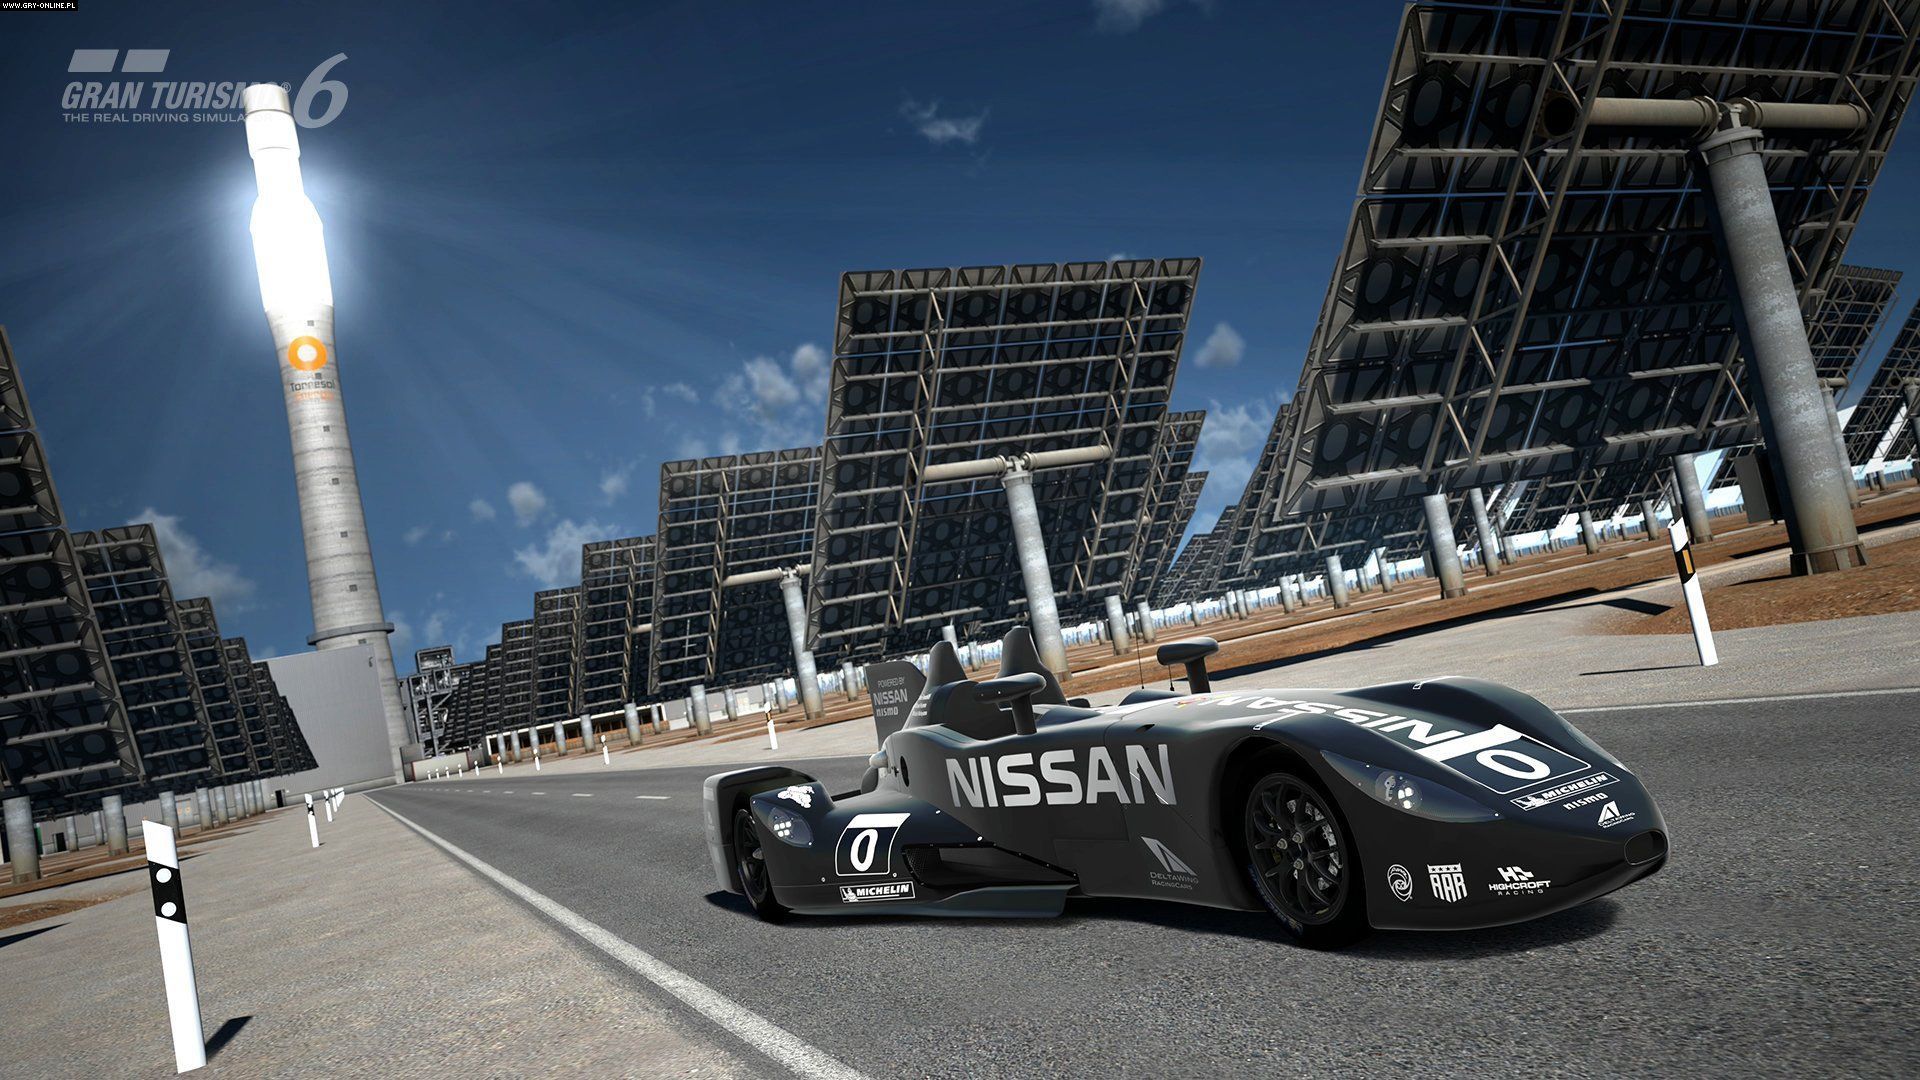 Gran Turismo 6 Wallpaper High Definition with HD Wallpaper Resolution 1920x1080 px 399.17 KB. Nissan, Turismo, Free picture